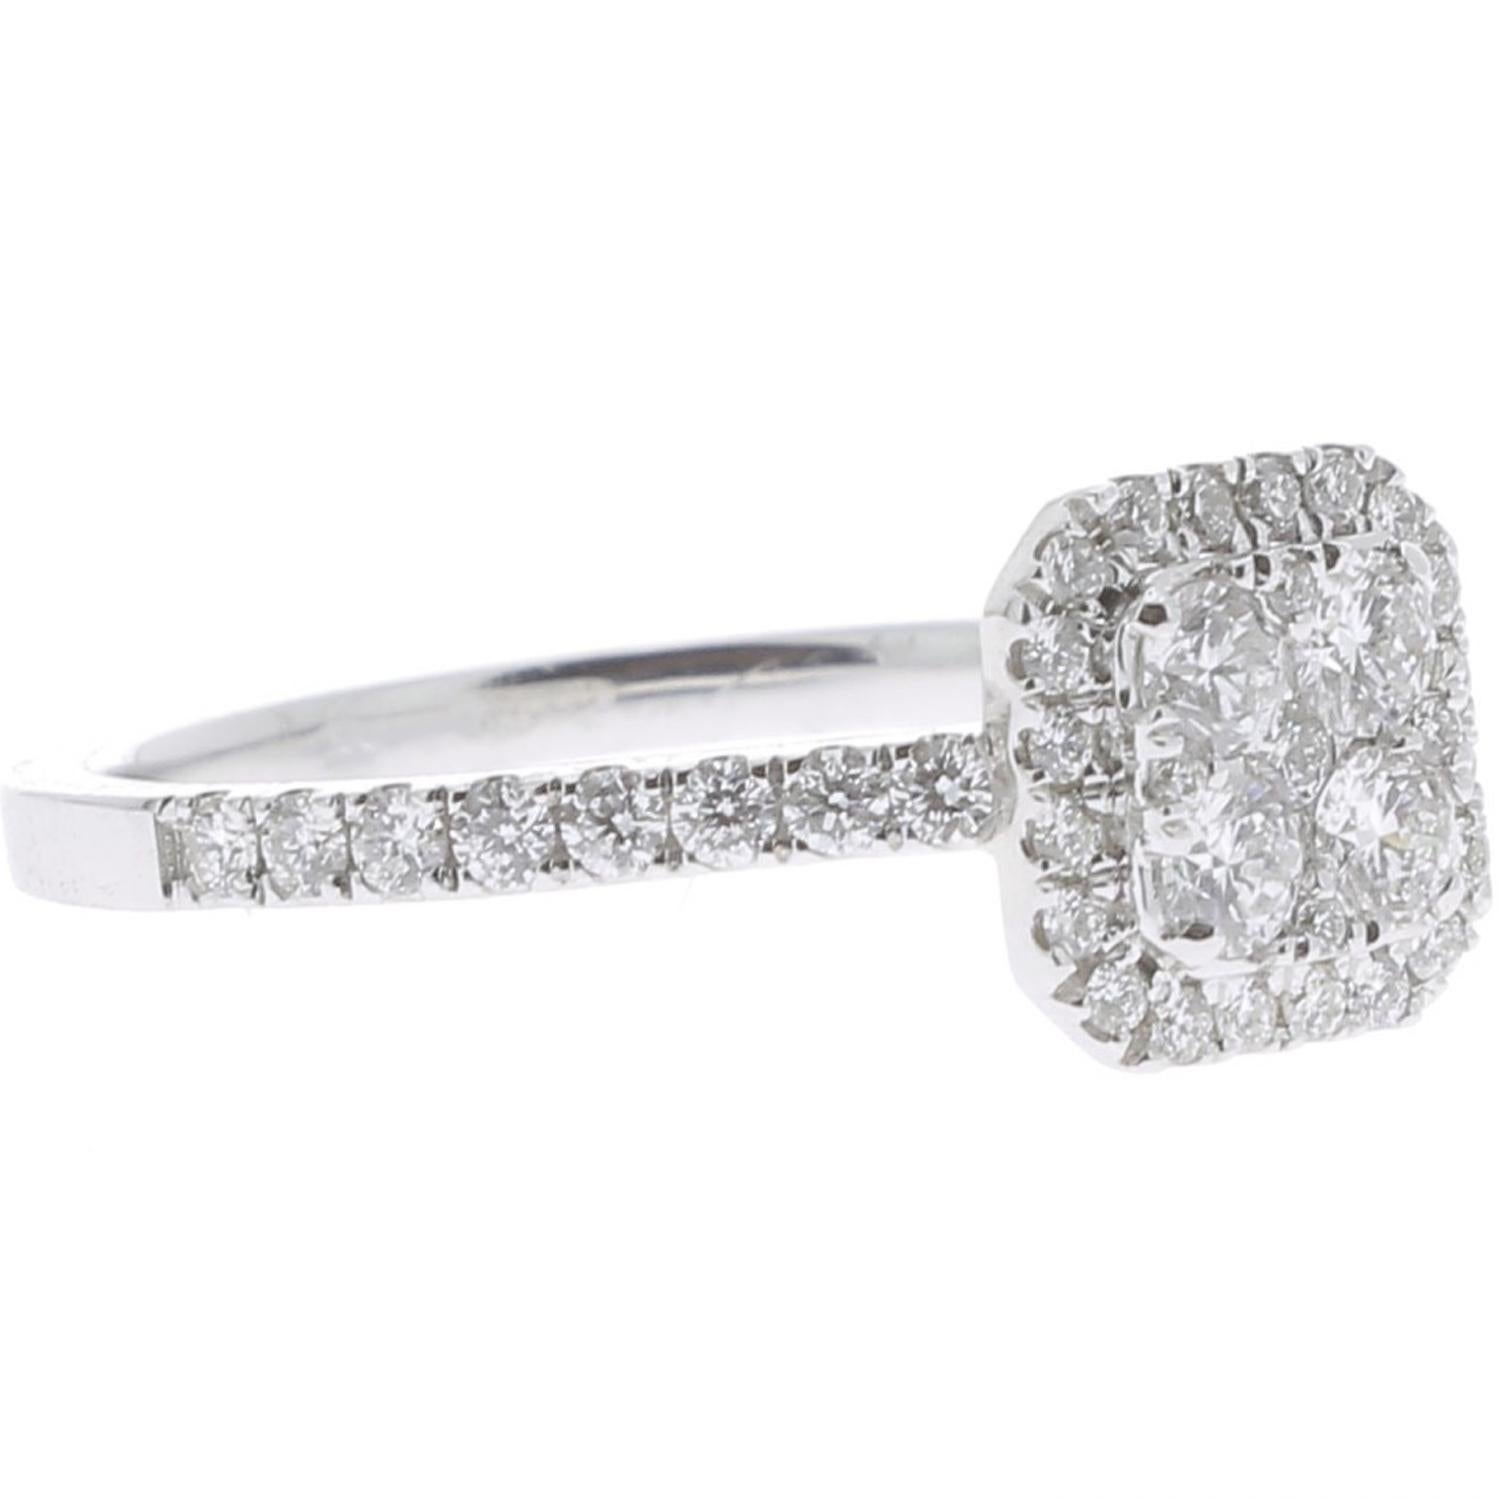 The Cushion Ring is a unique and trendy ring set with 0,74 carat.
The Wedding Ring is set with Brilliants and paved with 4 Diamonds.
The Ring is in 18K White Gold.
The Diamonds are GVS quality.
The ring size is 6 ½ US and can be size.